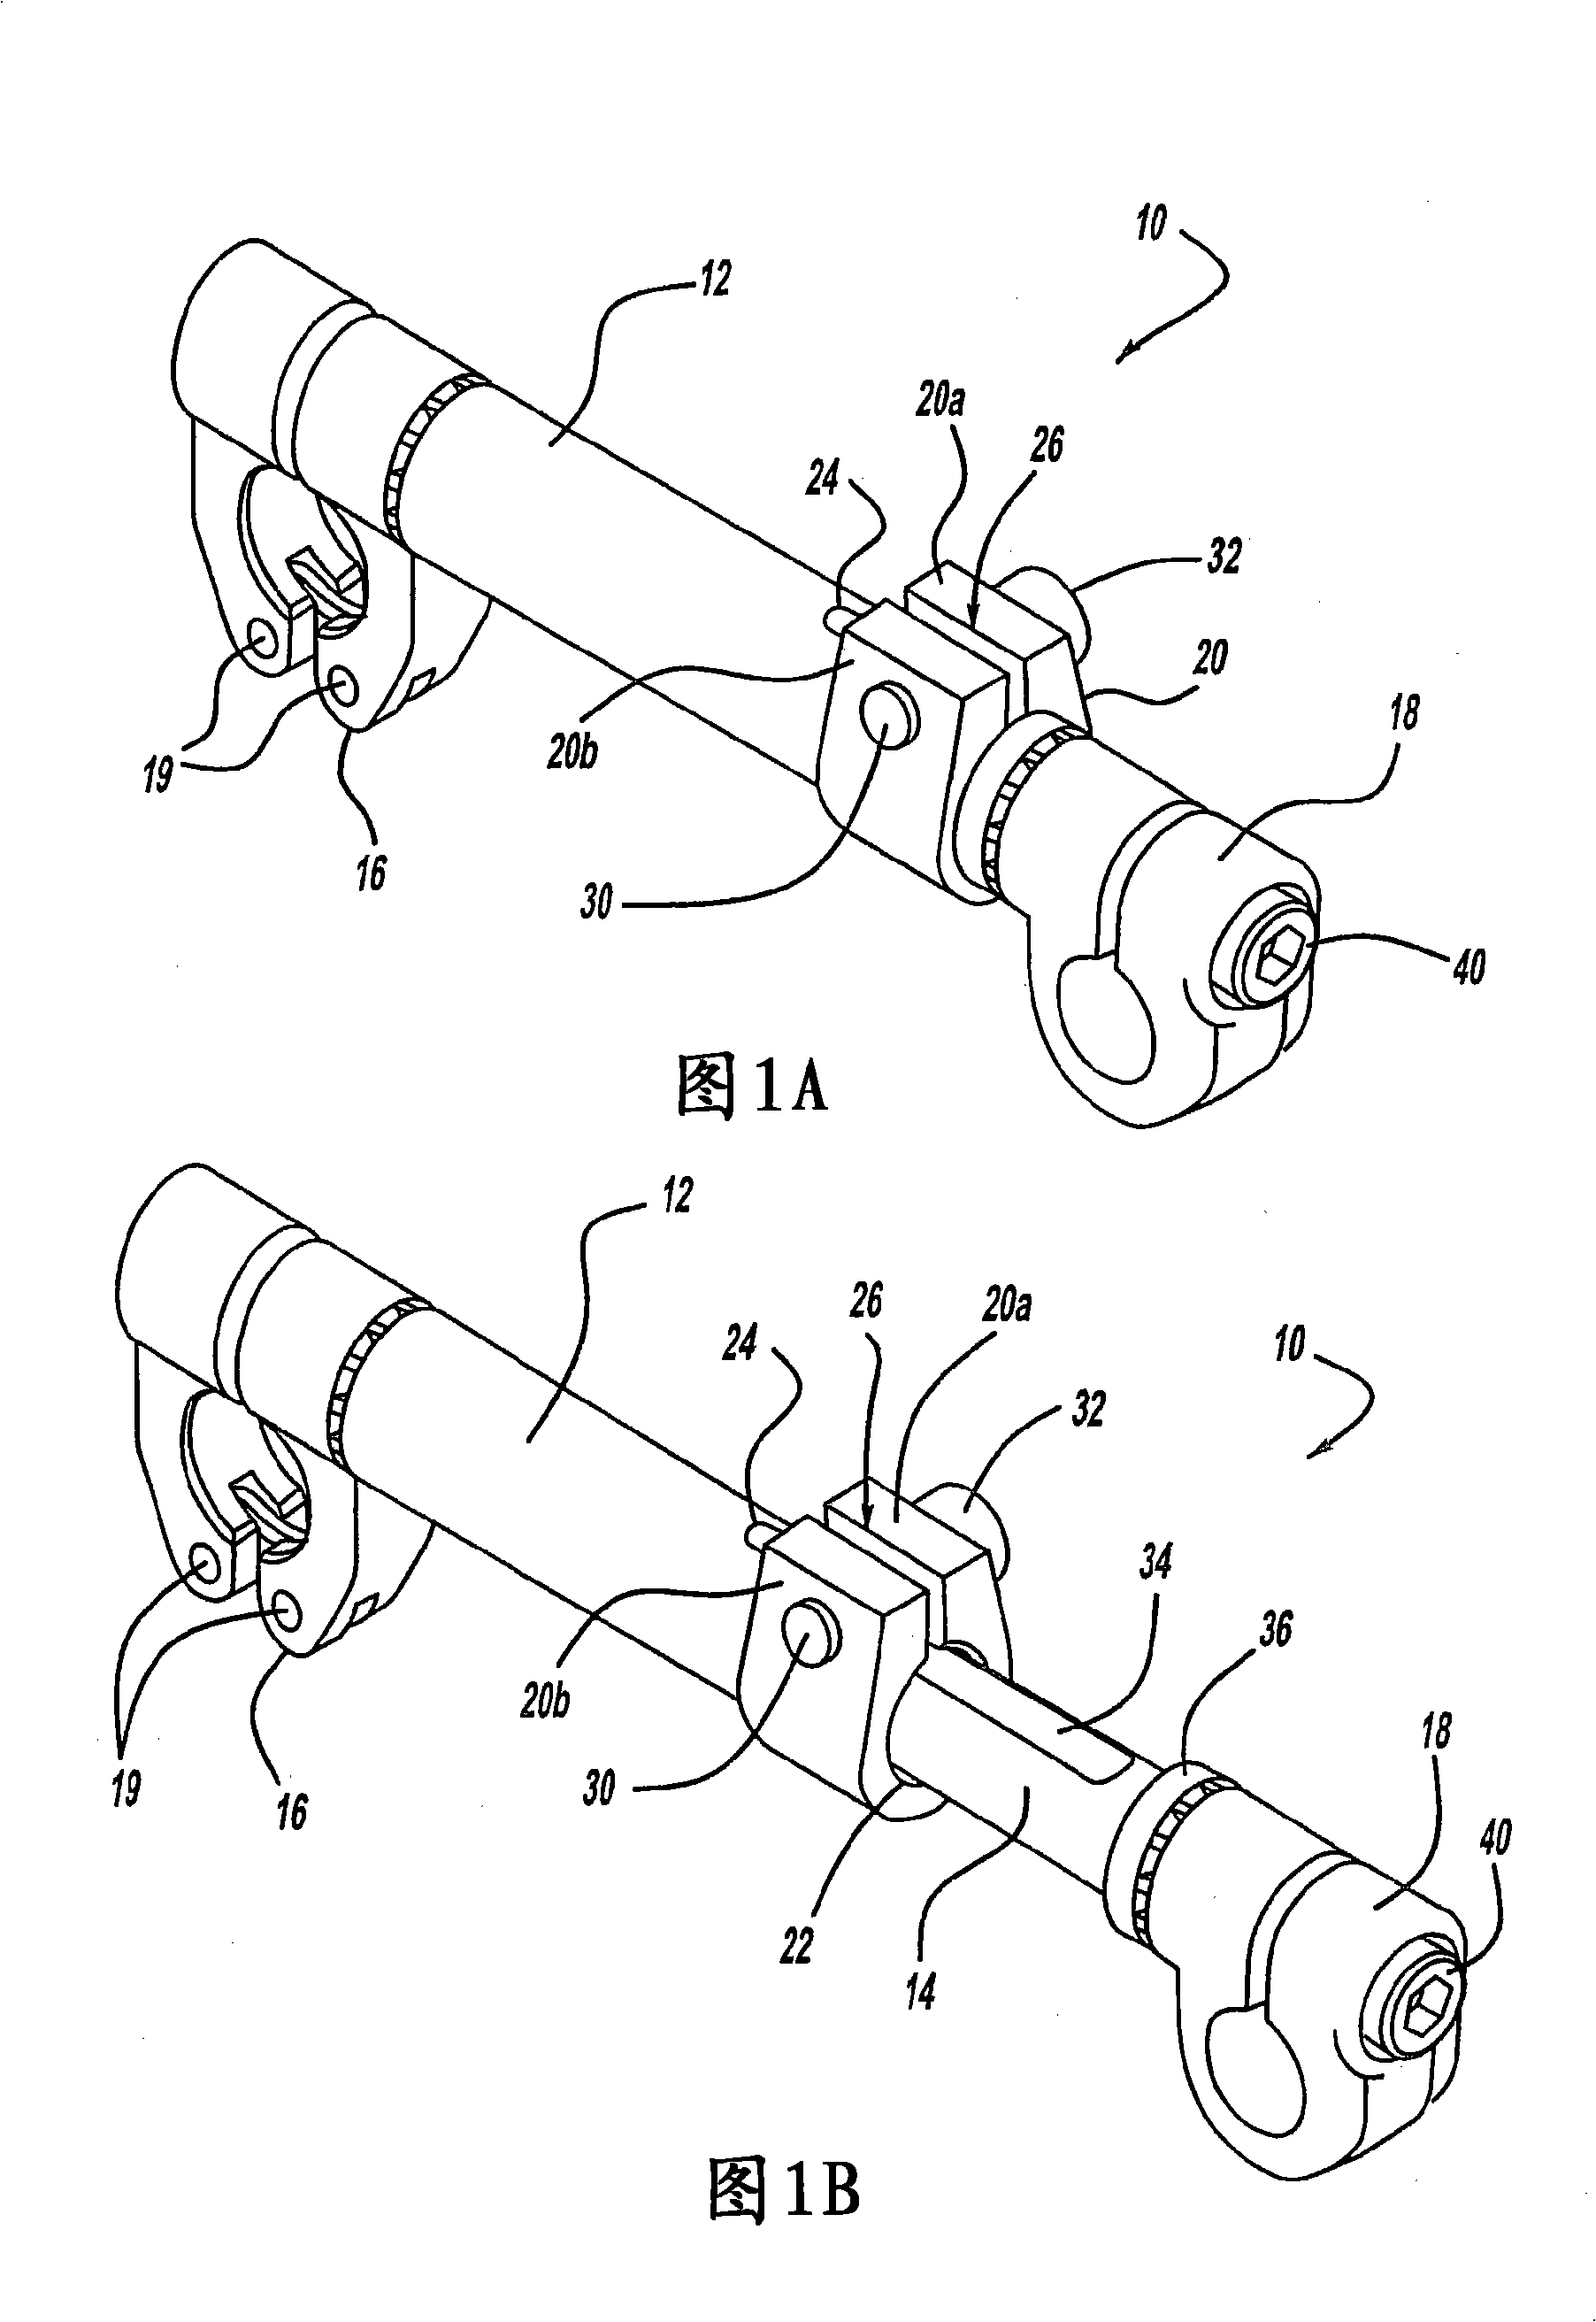 Telescoping clamp assembly